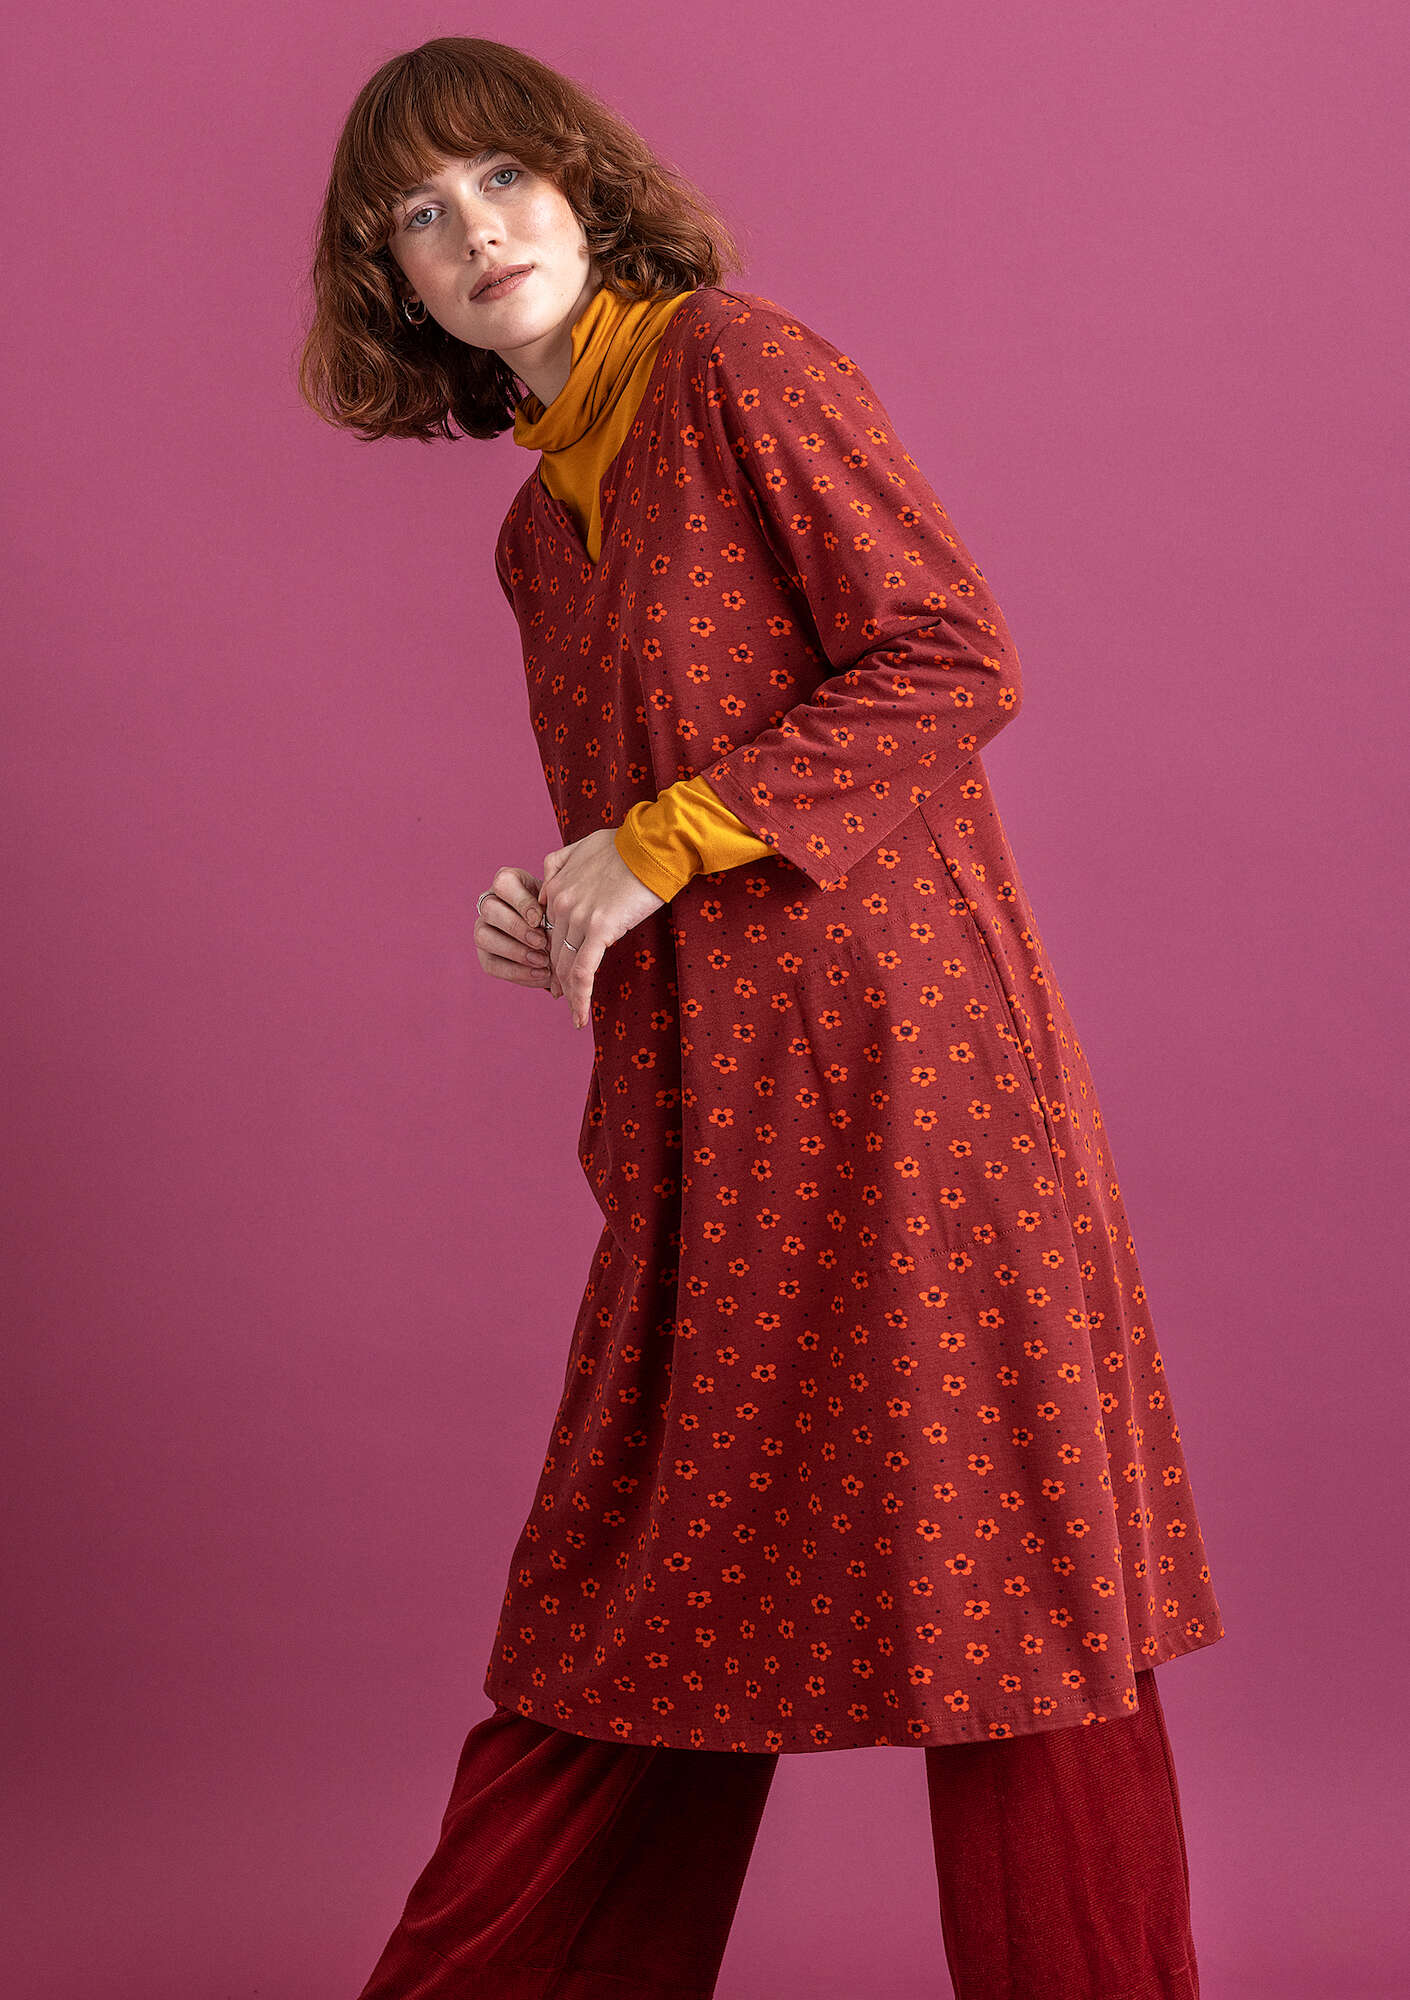 “Belle” jersey dress in organic cotton/spandex agate red/patterned